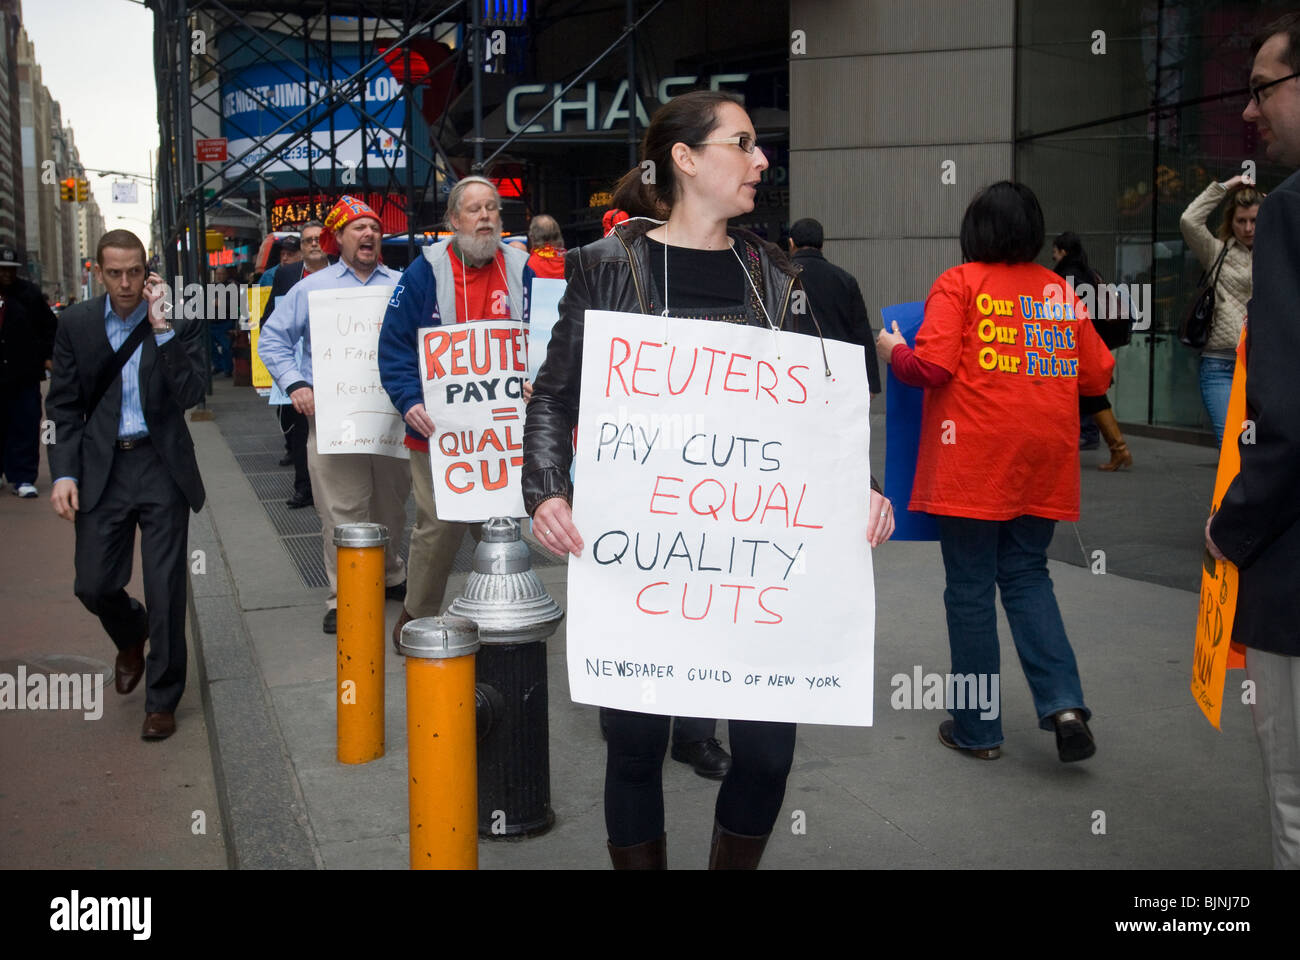 Members of the Newspaper guild of New York protest outside of the New York headquarters of Thomson Reuters in Times Square Stock Photo